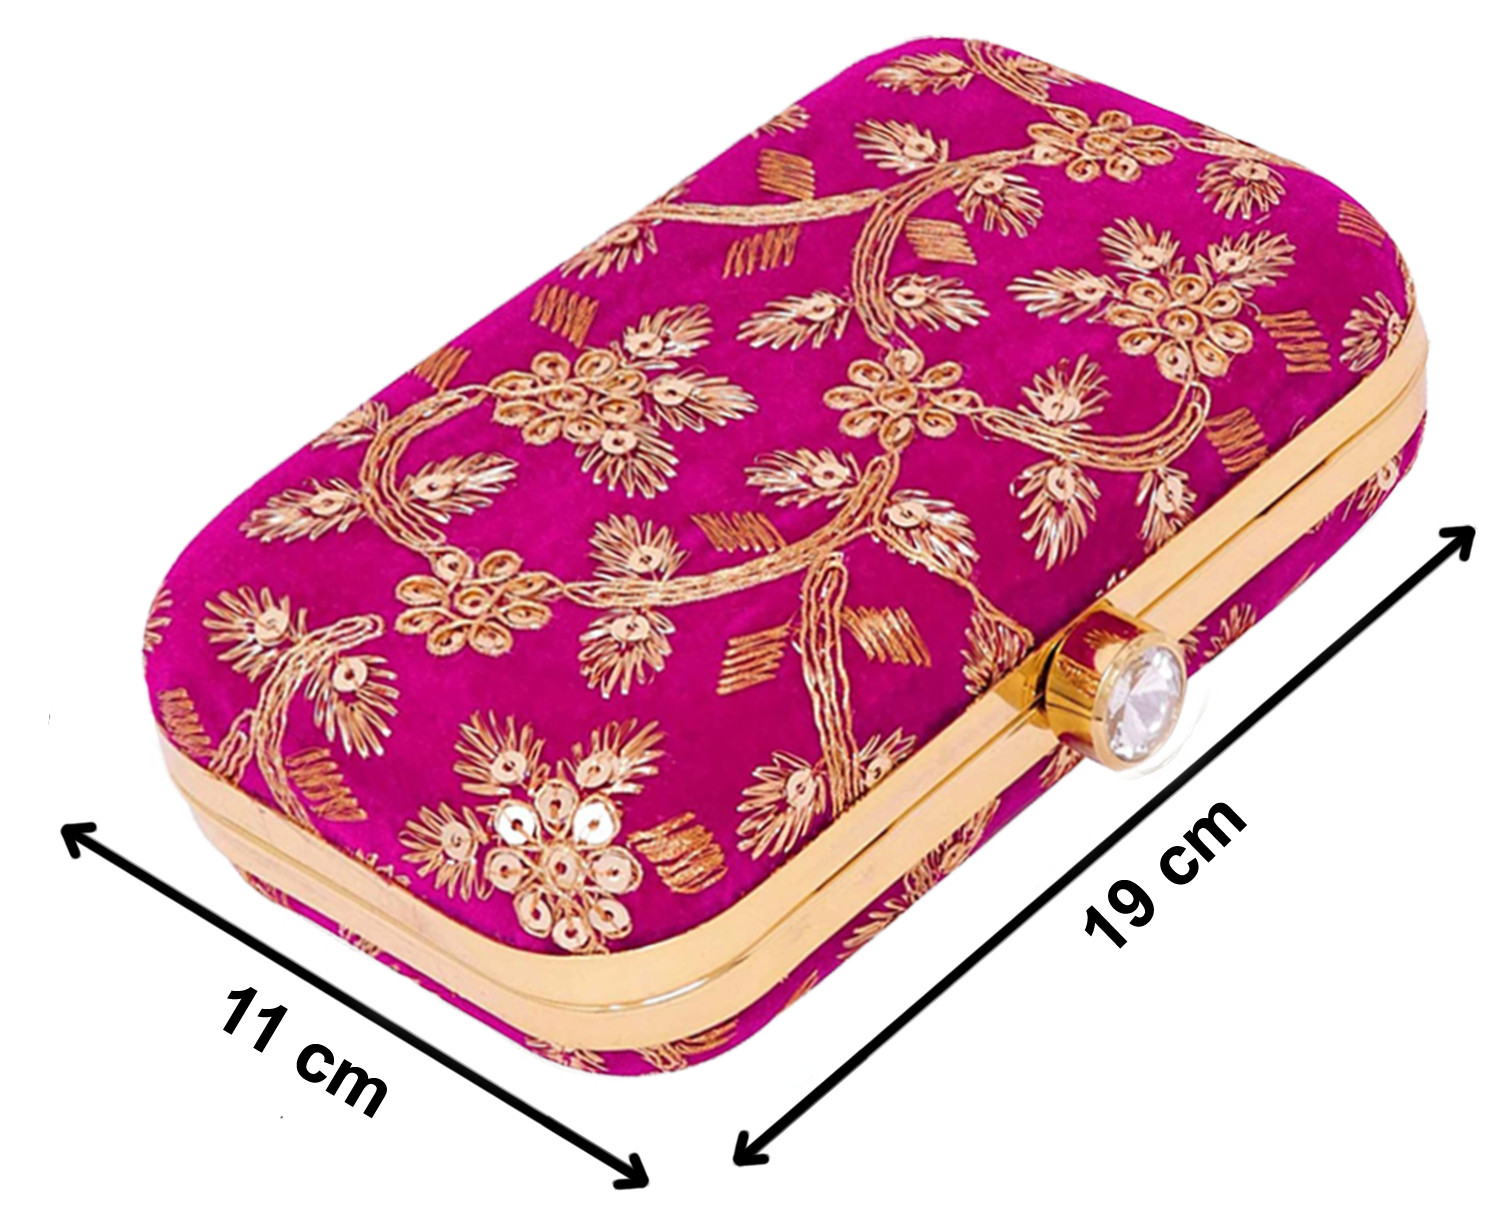 Kuber Industries Party Wear Clutch Bag Purse Handbag For Bridal, Casual, Party, Wedding,Set Of 2 (Pink & Maroon)-KUBMRT11880